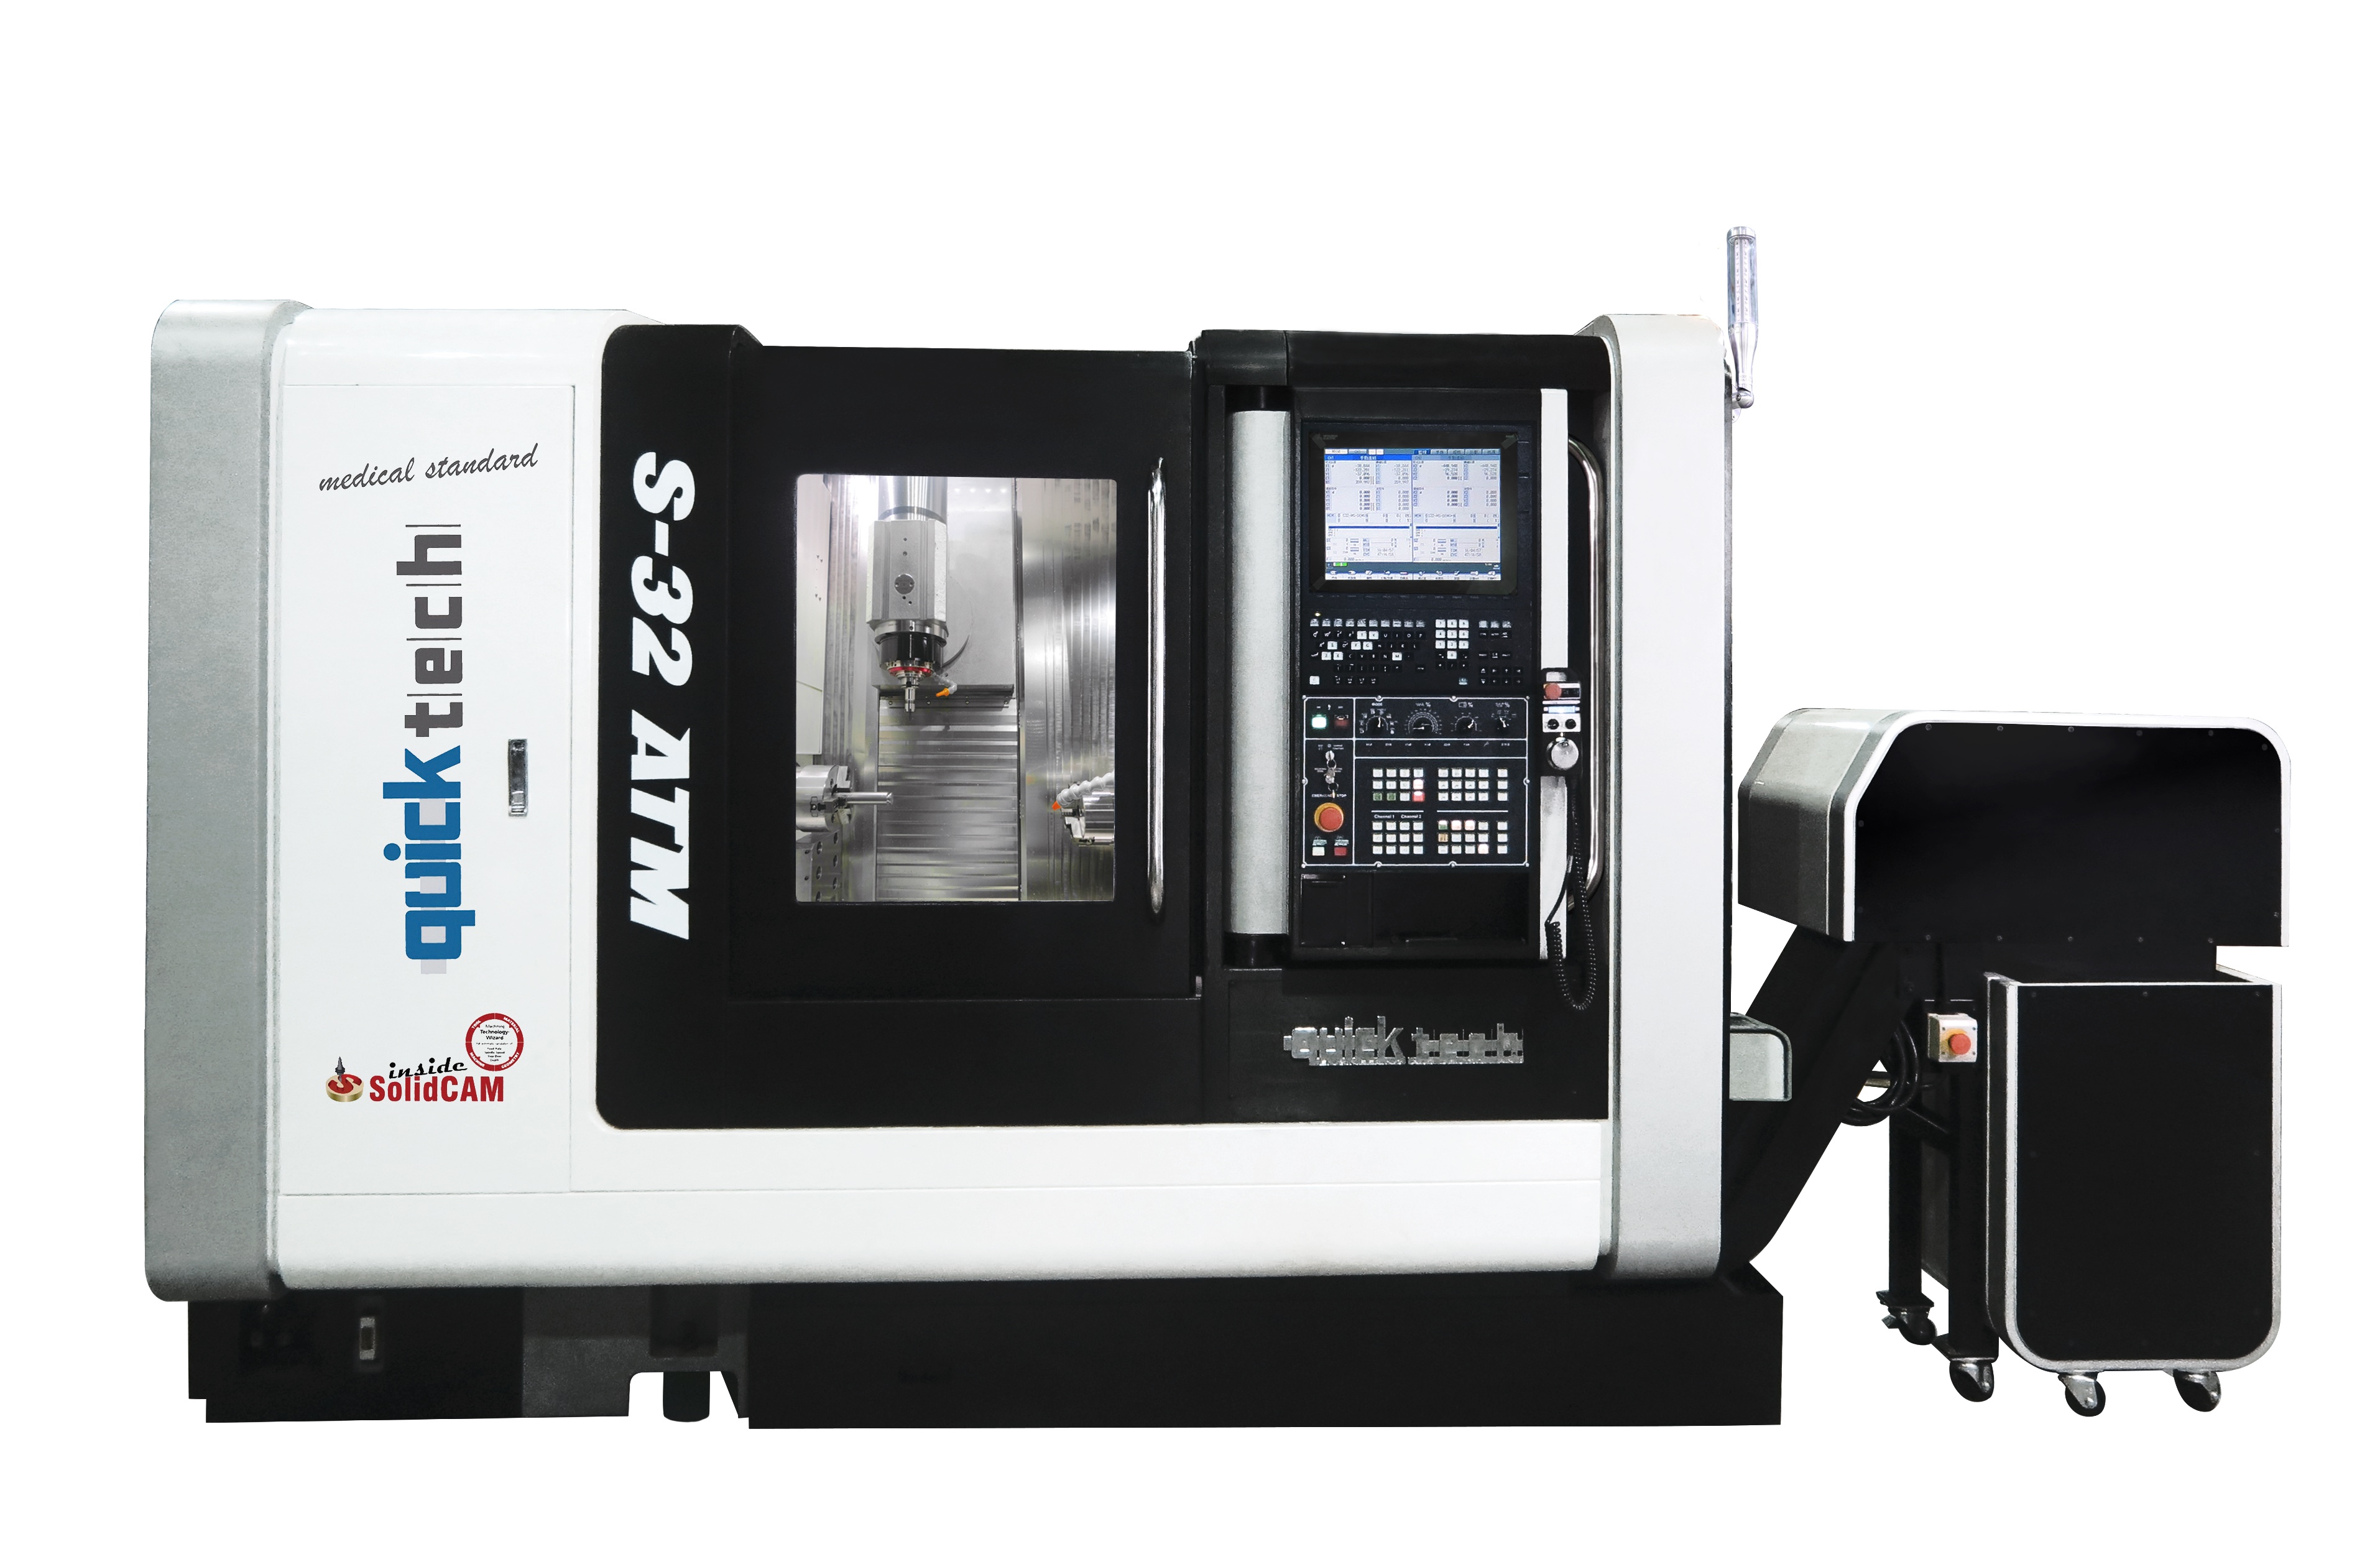 QuickTECH Machinery is a division of Tongtai, the former OEM for Hitachi Seiki machine tools. Its S-32 ATM machine is designed specifically for small, complex parts. (Image courtesy of Absolute Machine Tools)